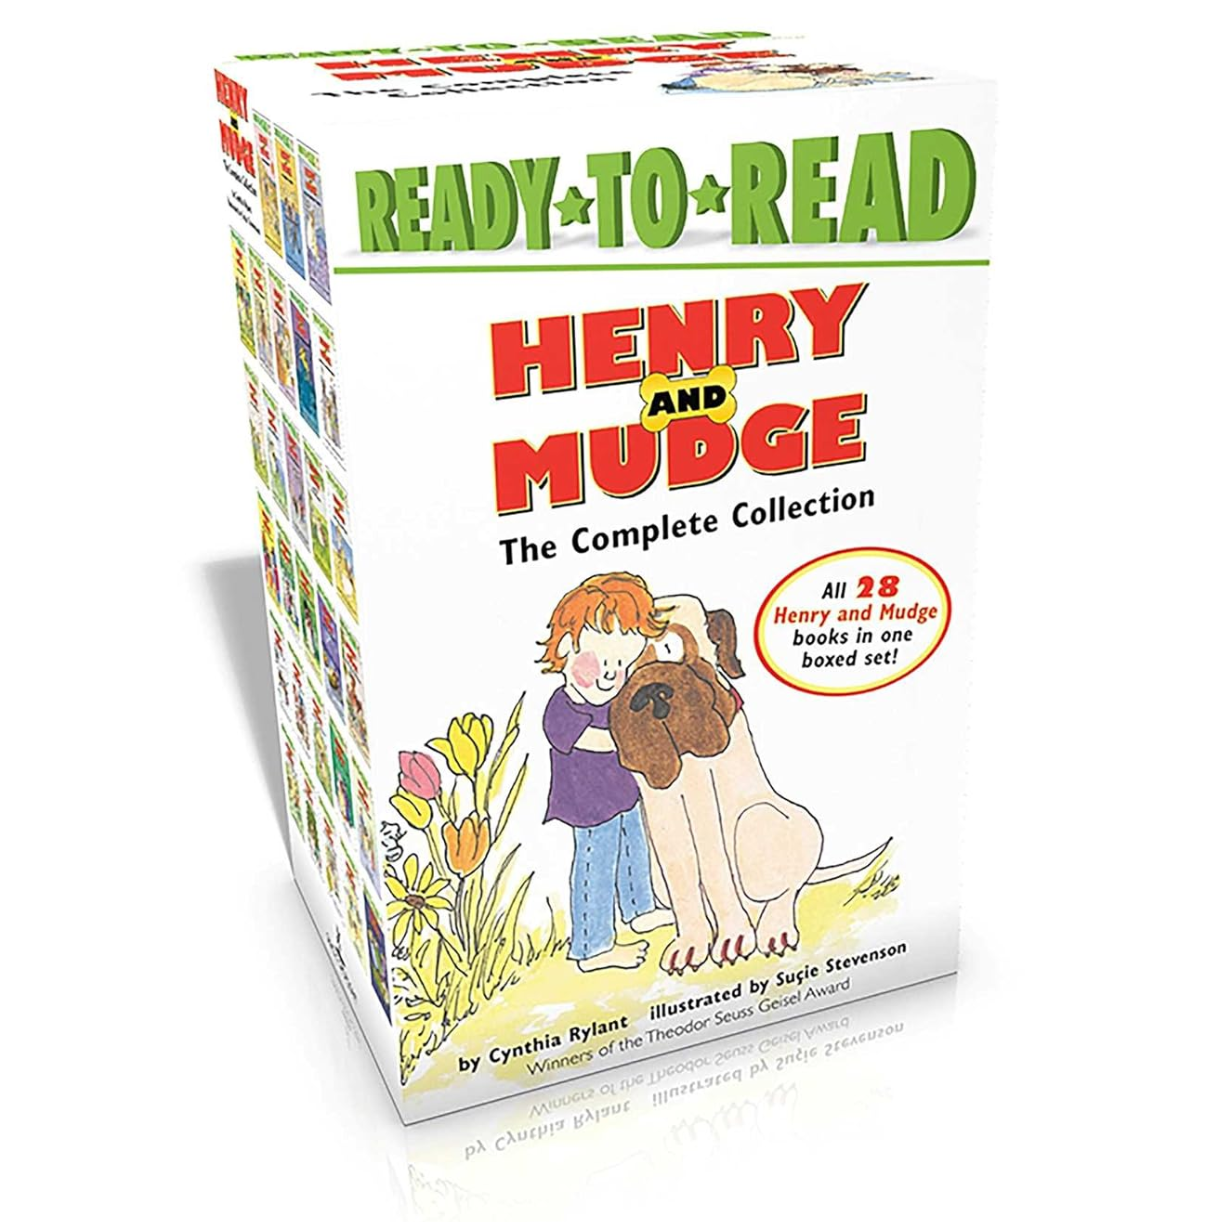 Henry and Mudge the Complete Collection (Boxed Set: Henry and Mudge; Henry and Mudge in Puddle Trouble